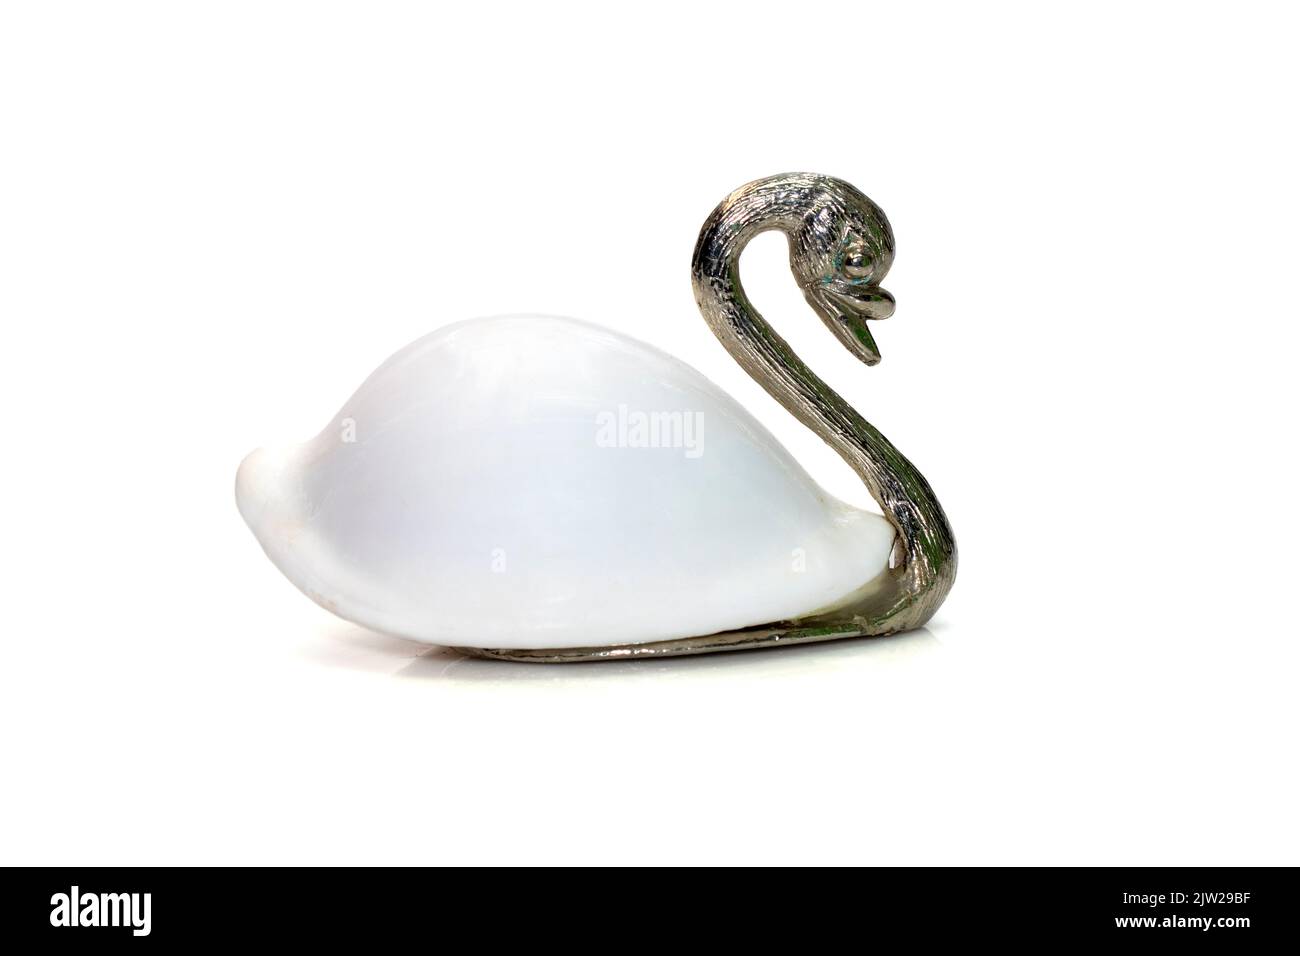 Image of swan sculpture with white shells(Ovula ovum) as part of its body. isolated on white background. Home decoration. Stock Photo